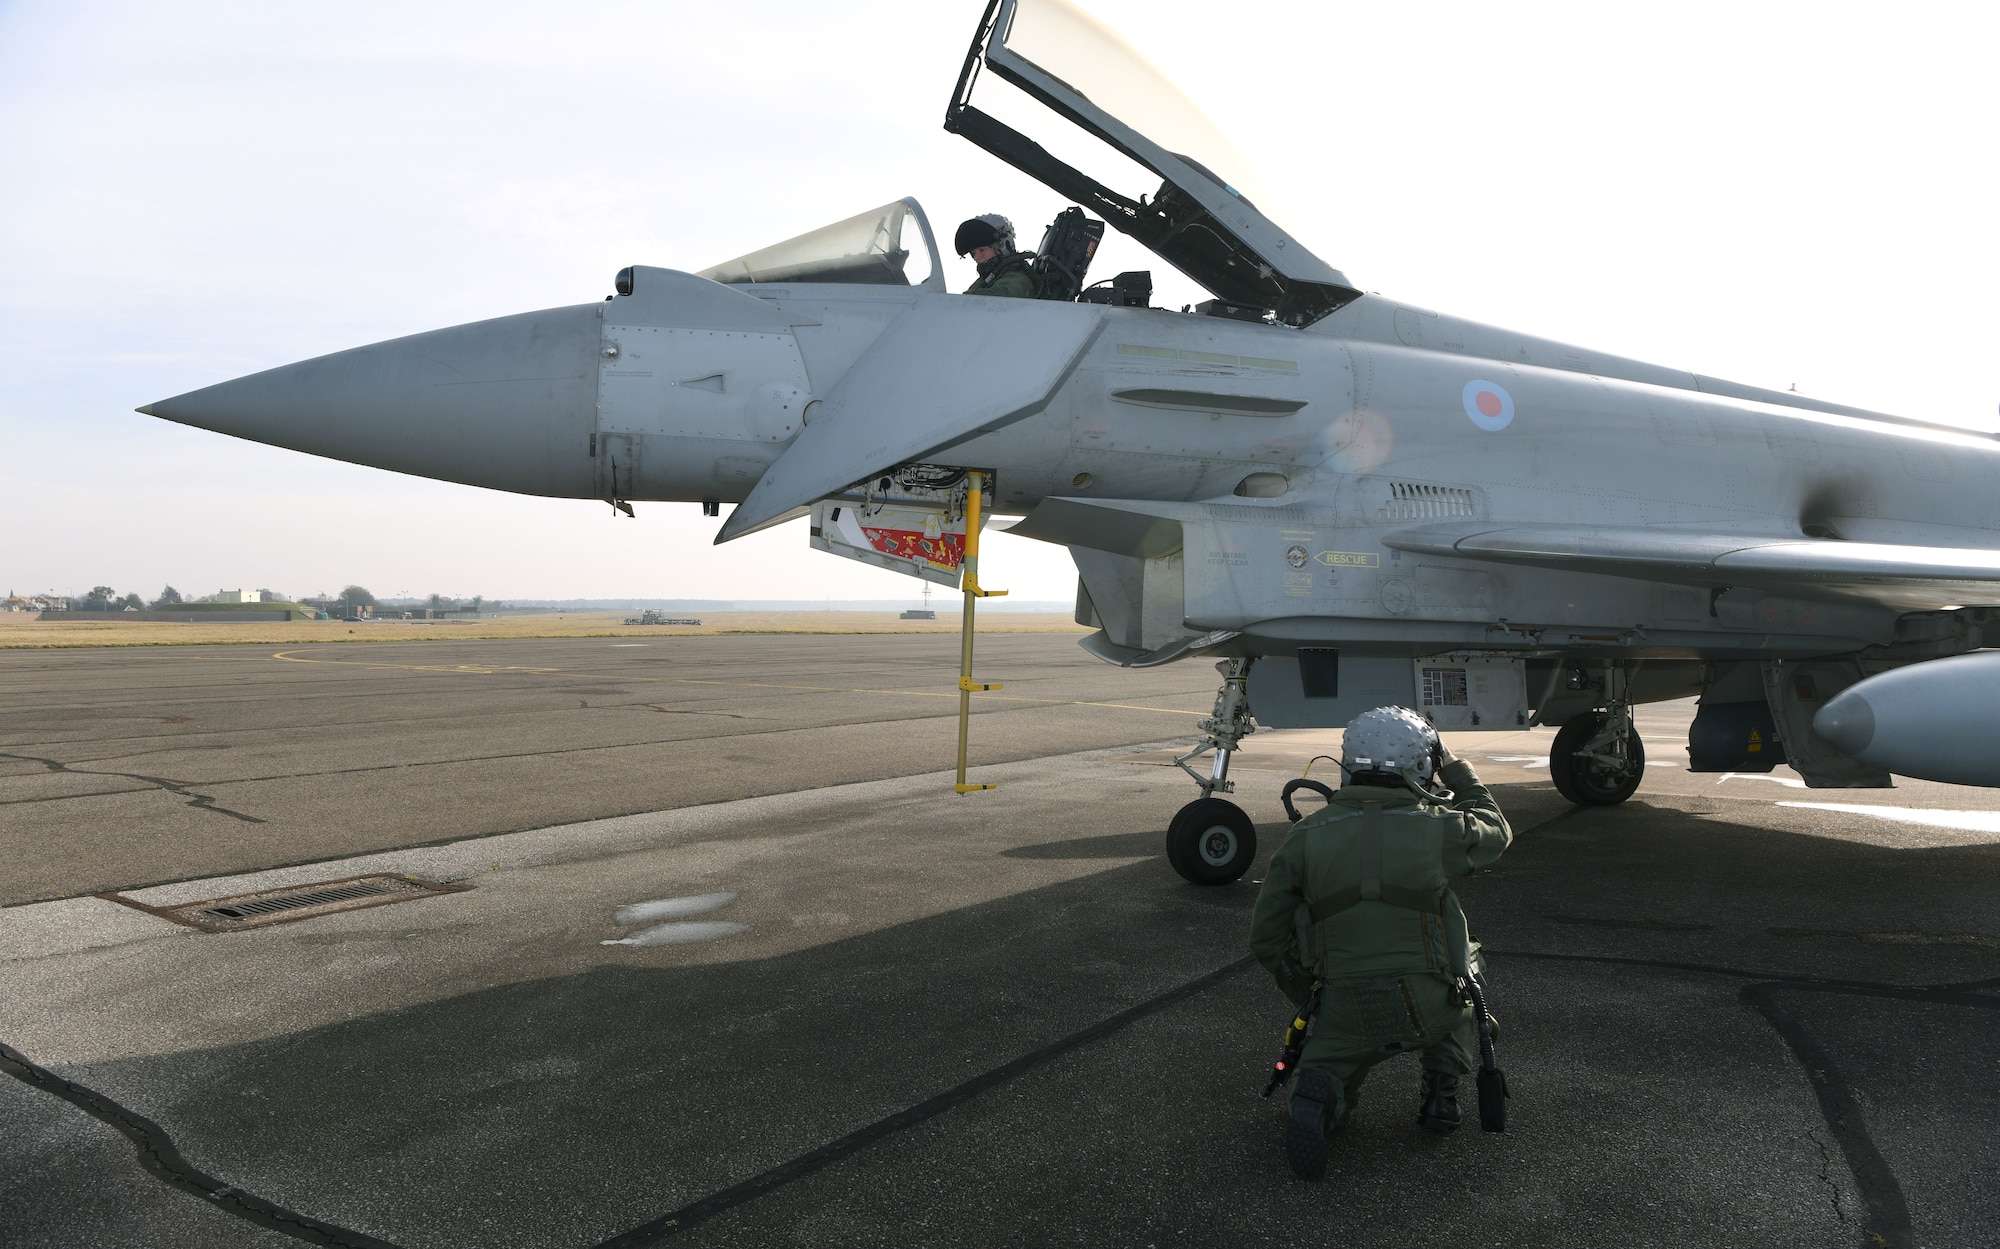 A Royal Air Force Eurofighter Typhoon FGR4 sits on the taxiway as pilots perform pre-checks prior to take-off at Royal Air Force Mildenhall, England, Feb. 15, 2023. The aircraft from RAF Coningsby, England, diverted here due to bad weather. The Typhoon is a highly capable and extremely agile multi-role combat aircraft, capable of being deployed for the full spectrum of air operations, including air policing, peace support and high-intensity conflict. (U.S. Air Force photo by Karen Abeyasekere)